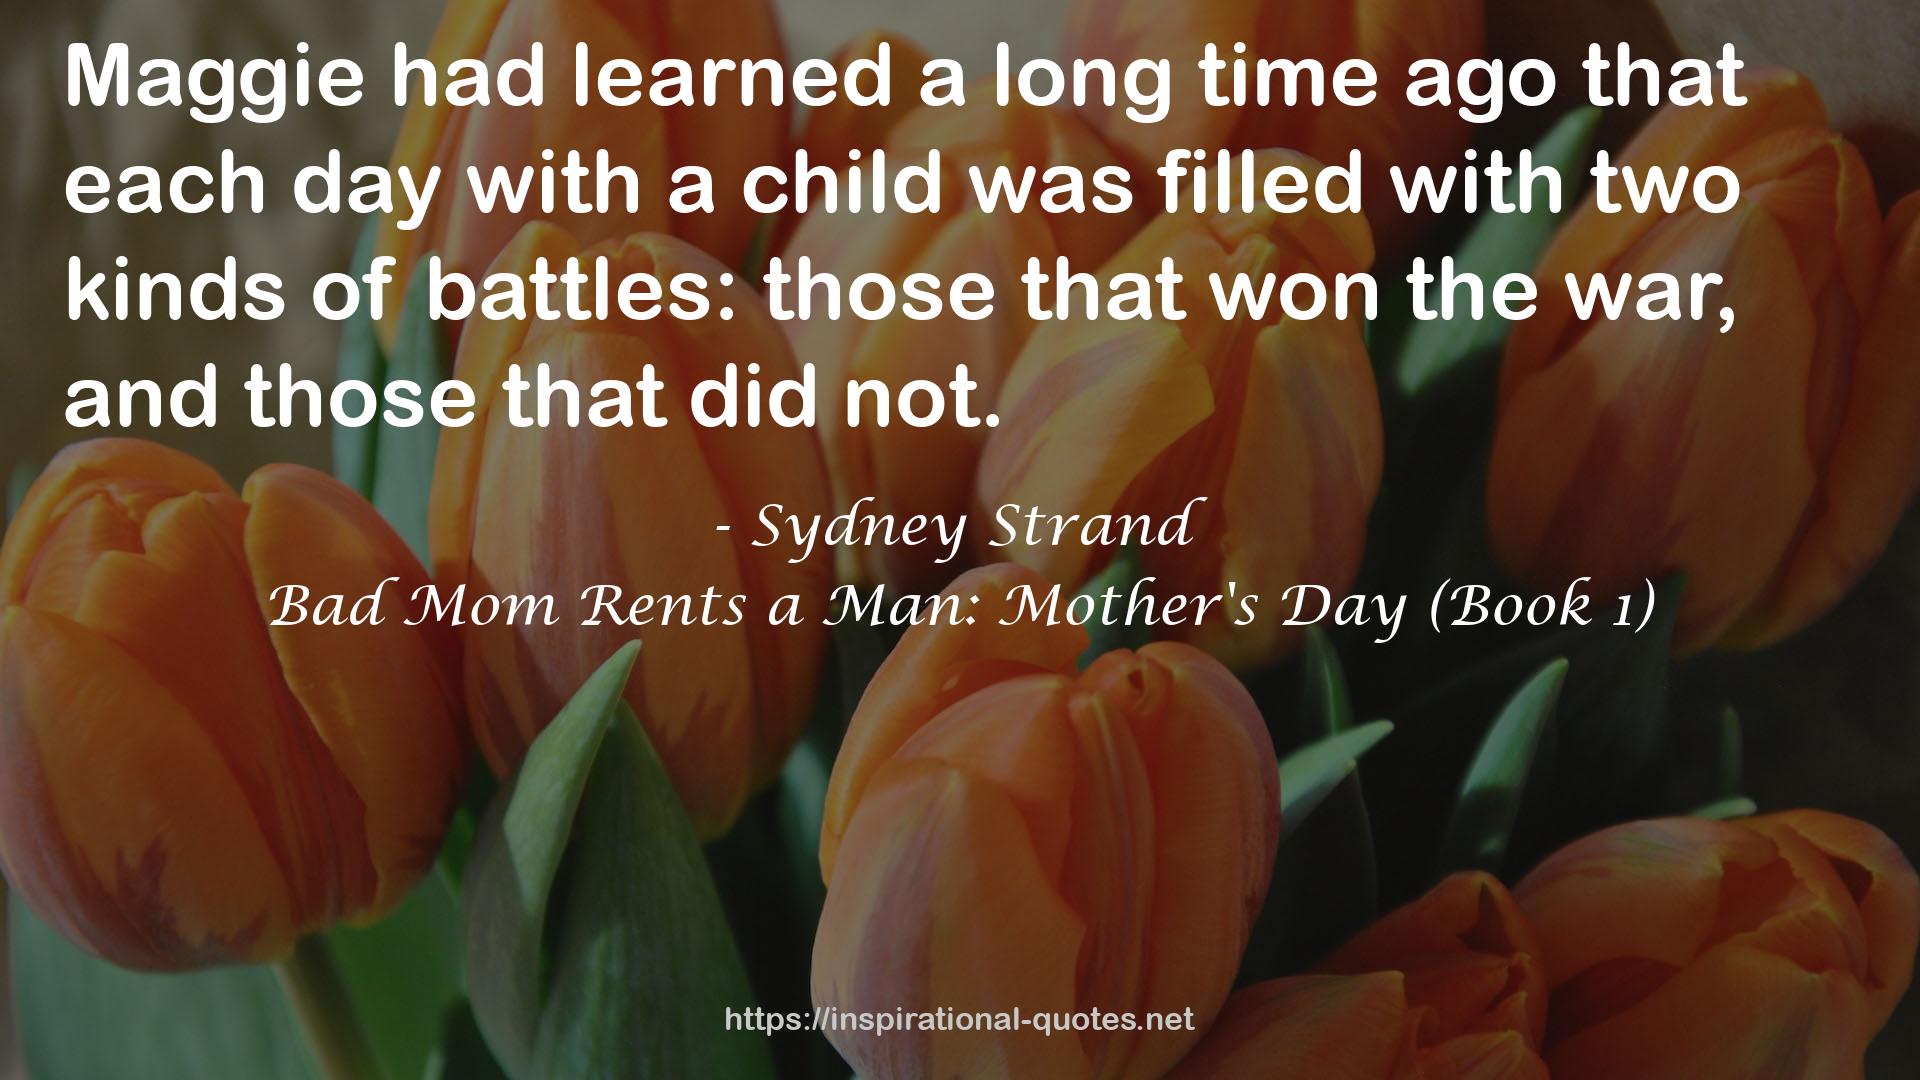 Bad Mom Rents a Man: Mother's Day (Book 1) QUOTES